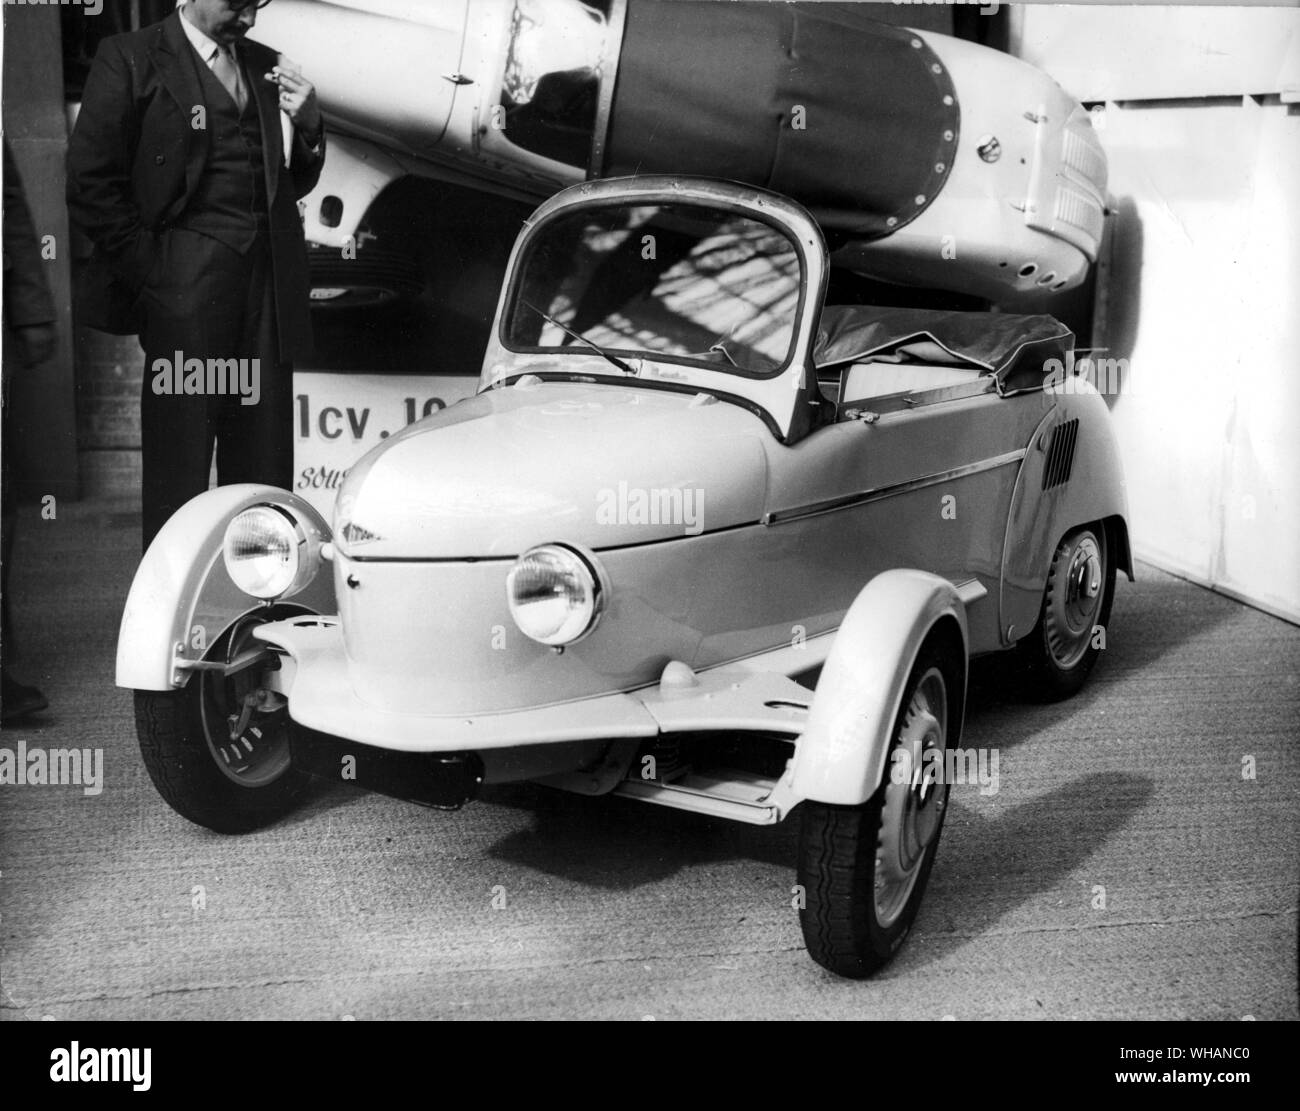 This French made two seater Reyonnah is on exhibition at the Paris car show. It's one horsepower 175cc engine gives it a speed of 62 mph and no driving licence is necessary for this car in France. 1954. Stock Photo